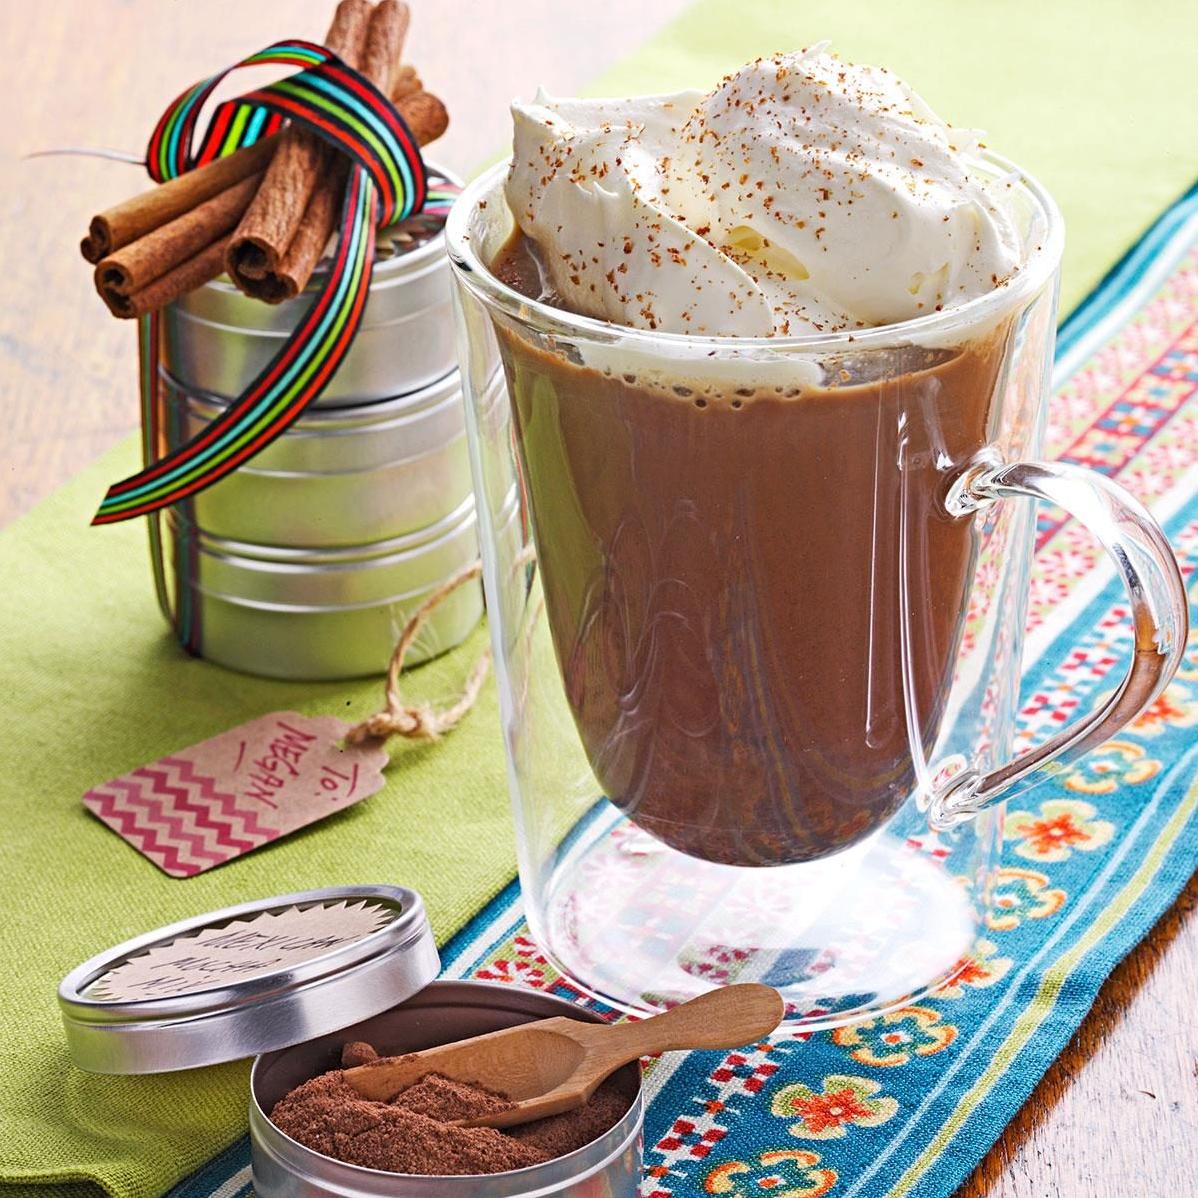  Sprinkle some cocoa powder on top of your mocha mix to add a touch of elegance.